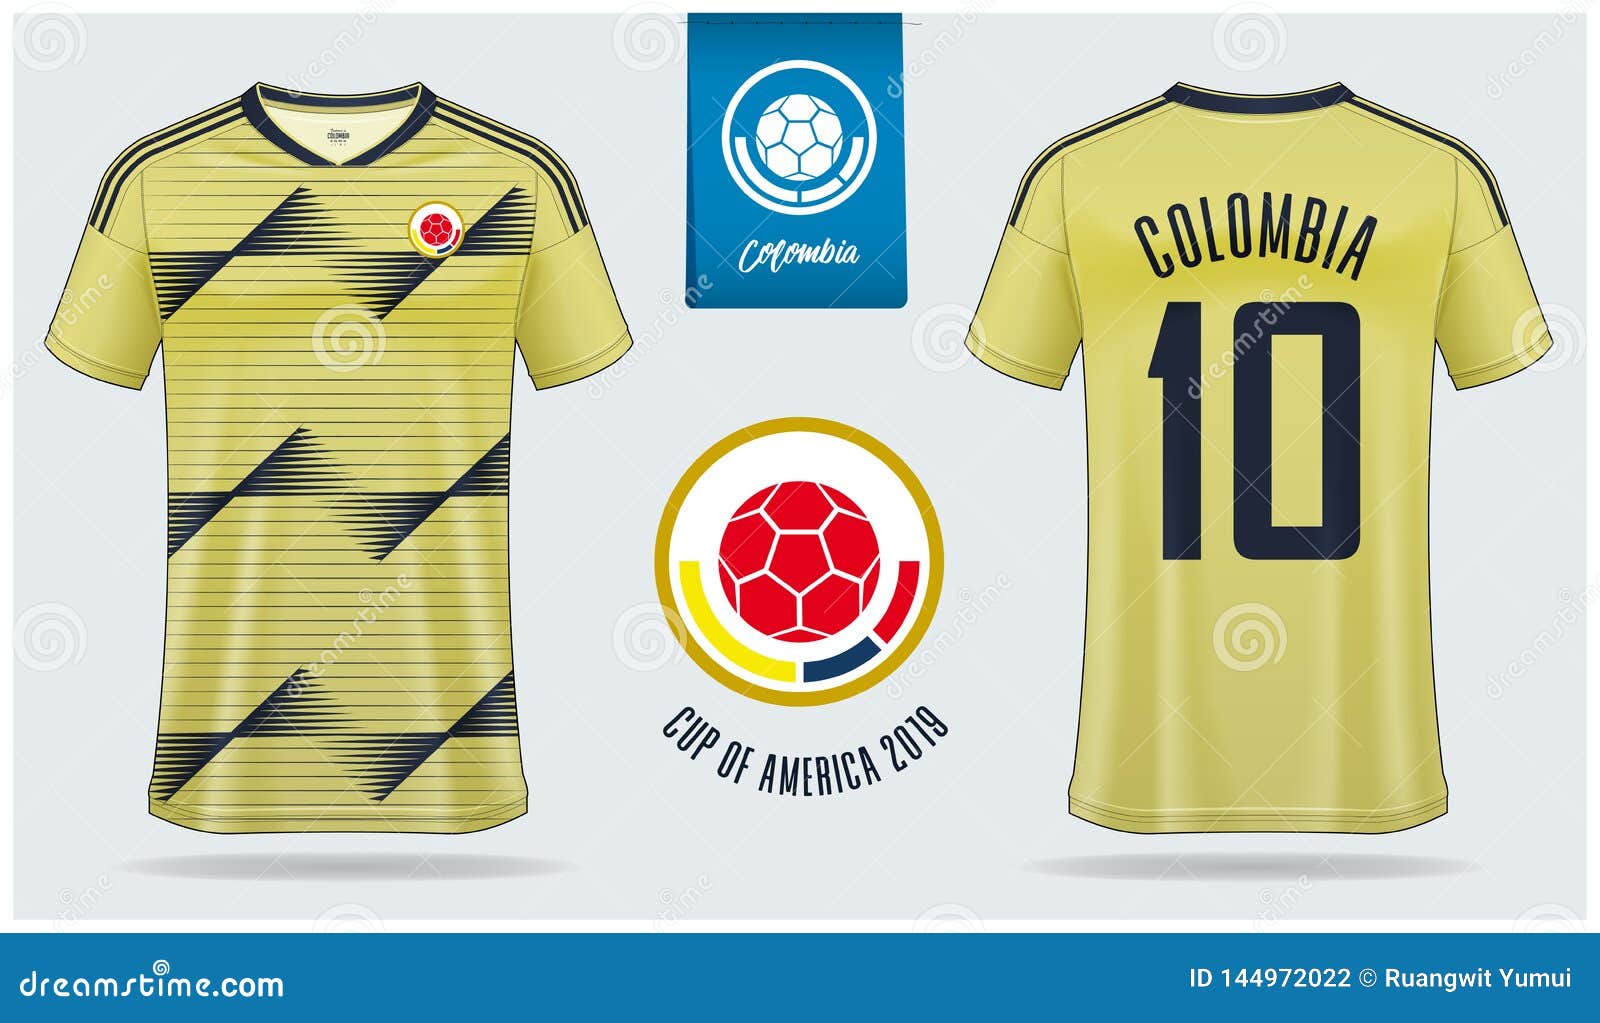 colombia national team jersey 2019